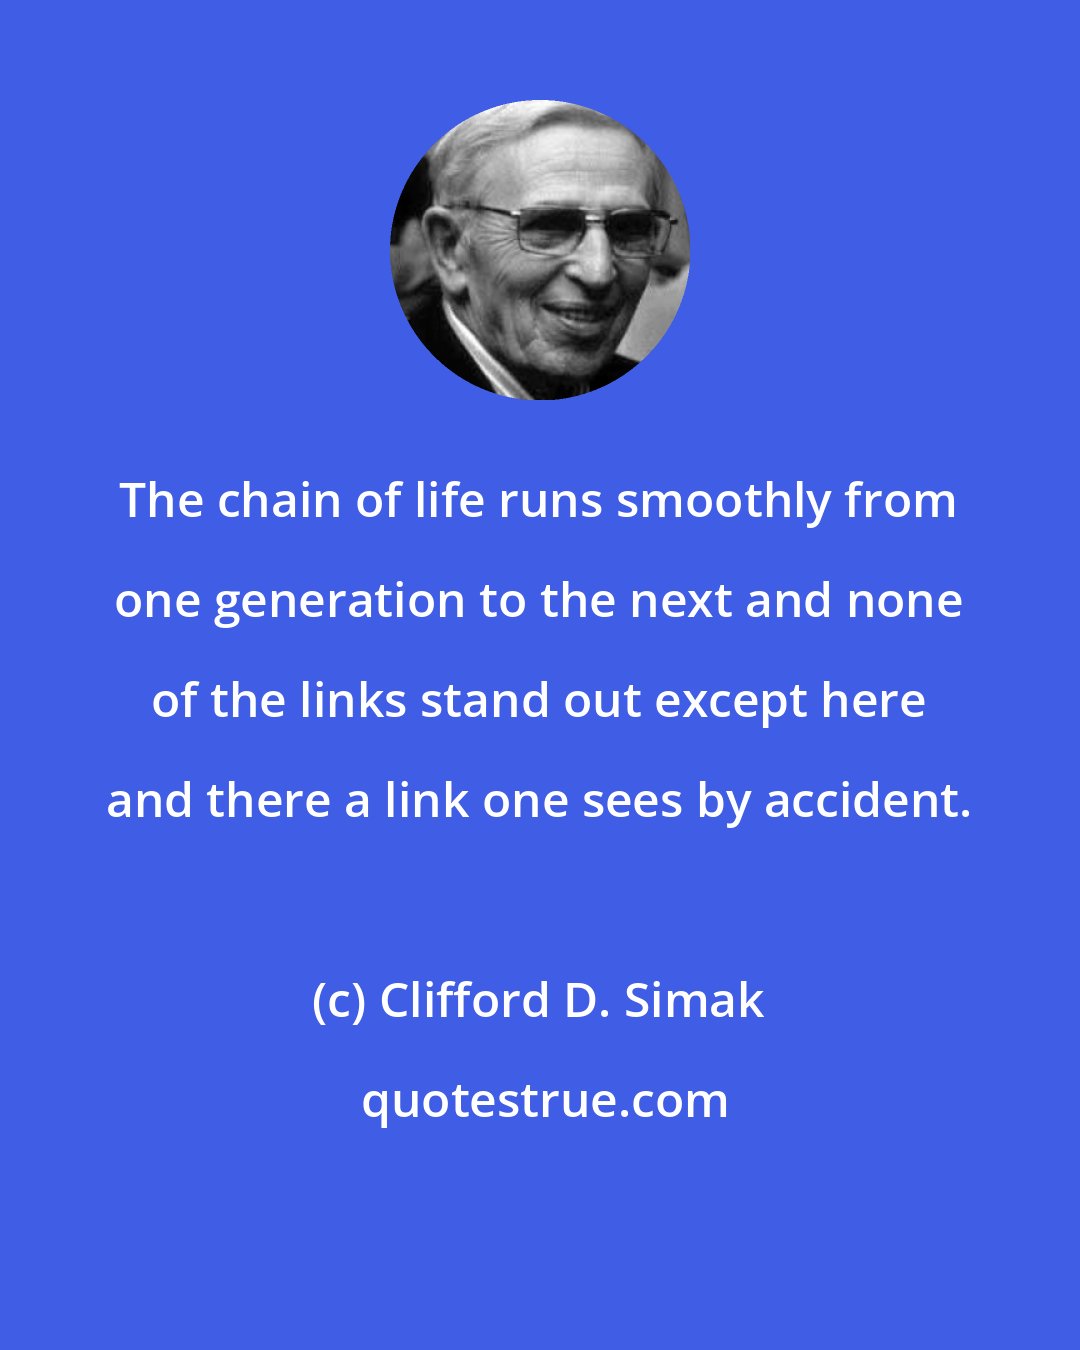 Clifford D. Simak: The chain of life runs smoothly from one generation to the next and none of the links stand out except here and there a link one sees by accident.